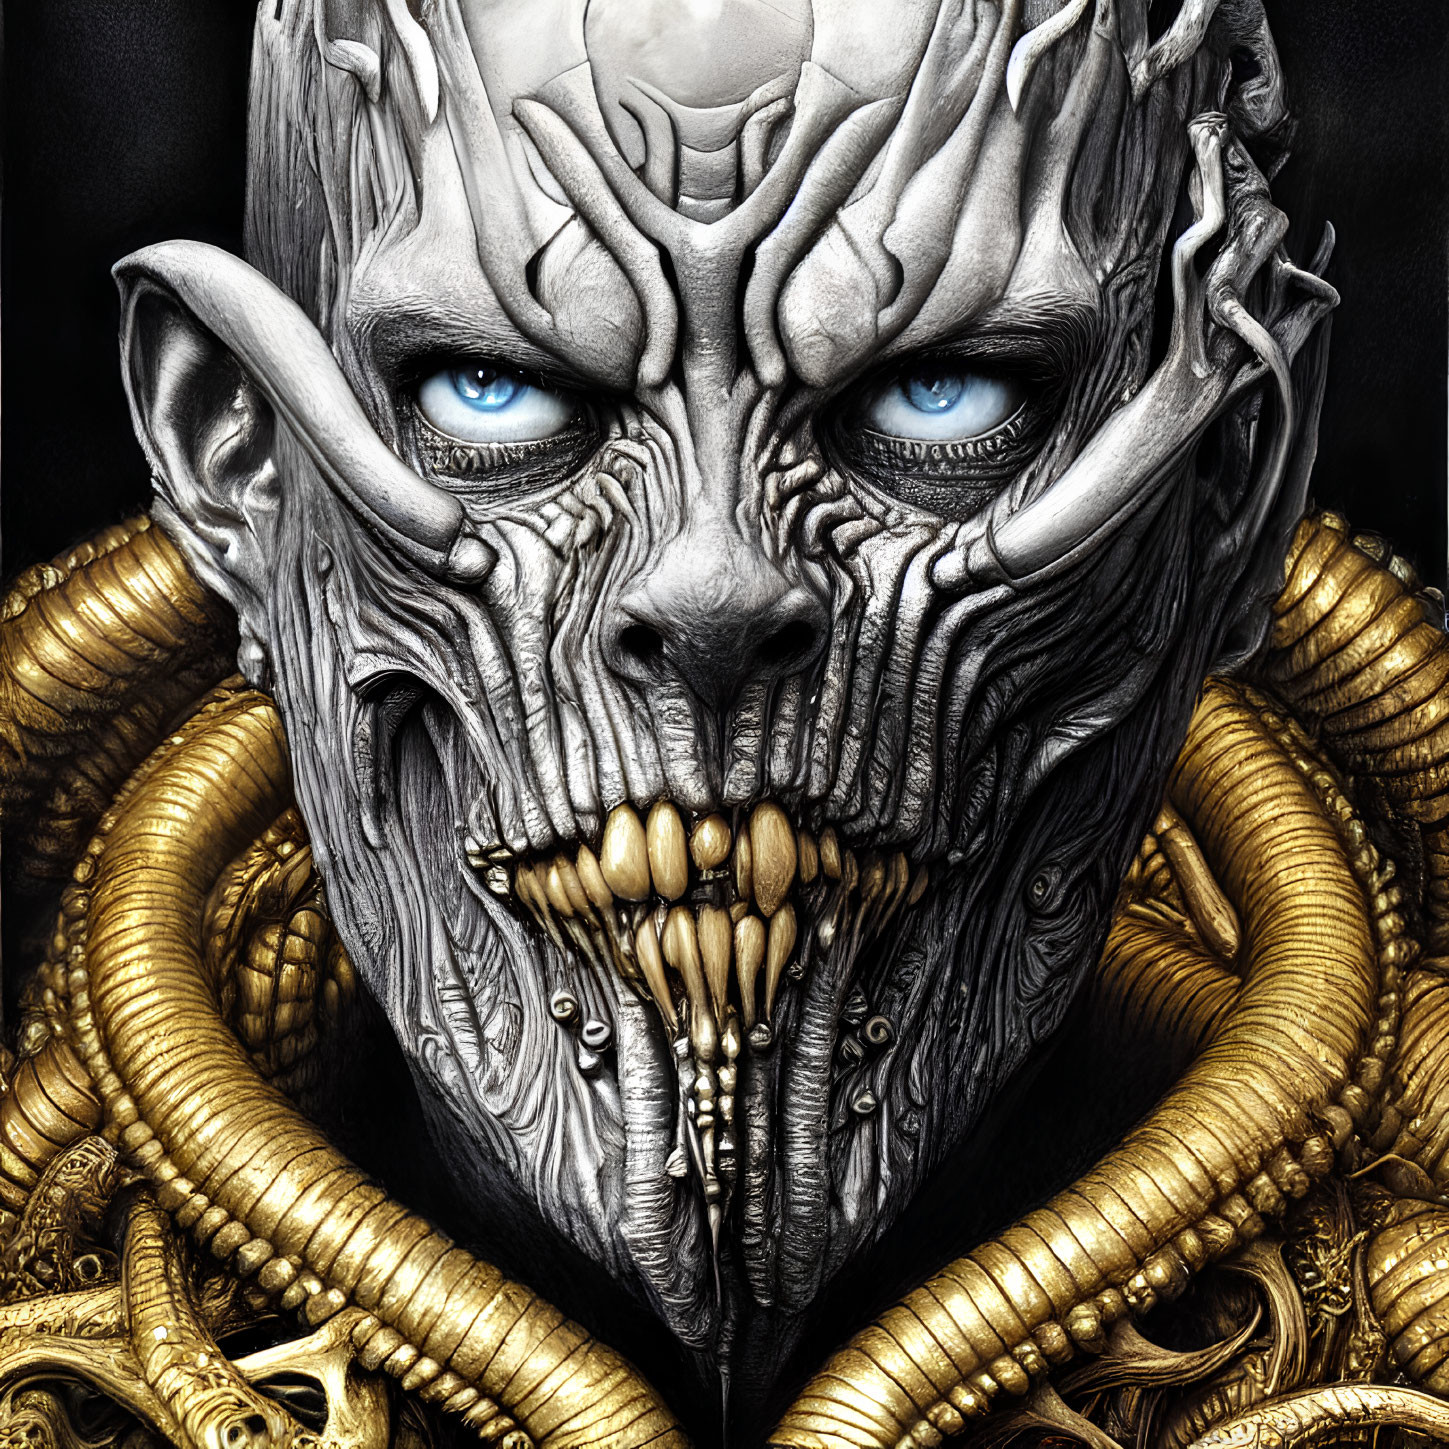 Fantasy creature with blue eyes, wooden texture face, and gold serpentine coils.